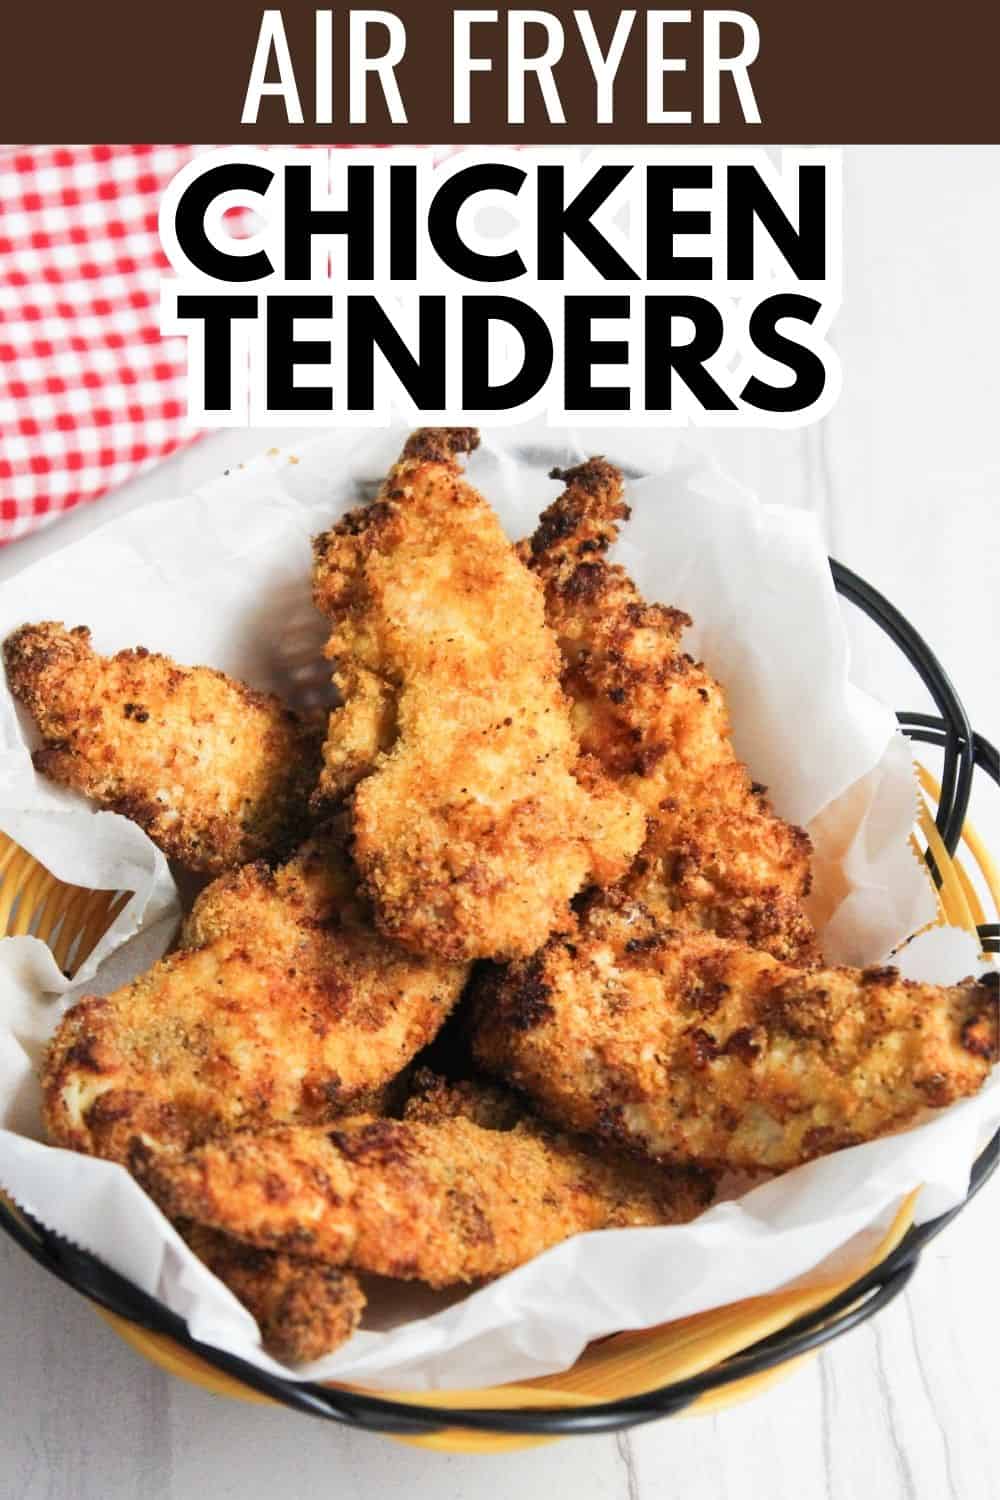 Air fryer chicken tenders in a bowl with the text air fryer chicken tenders.